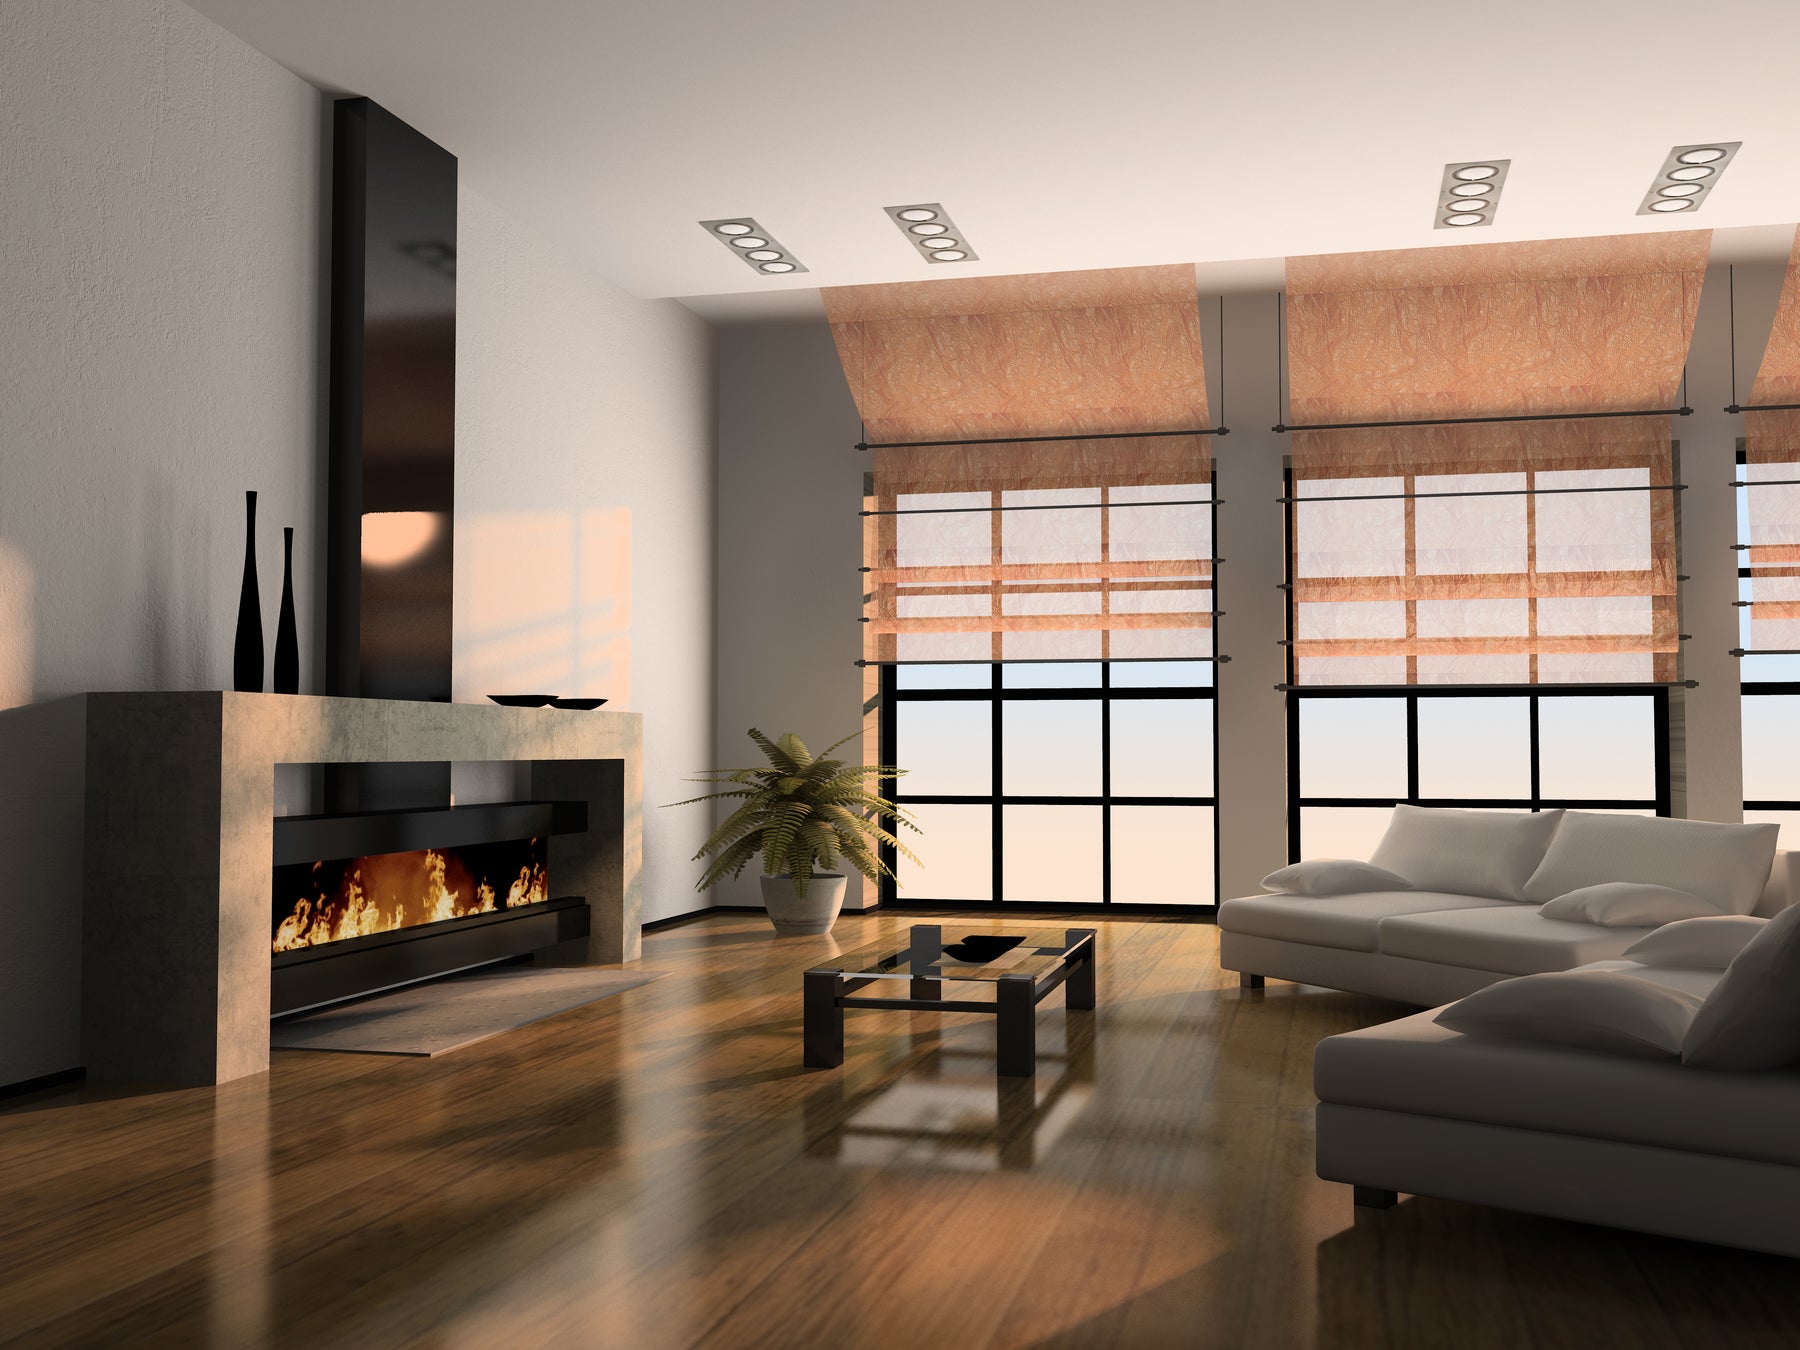 How to Install Your Dream Electric Fireplace? Get A Comprehensive Guide from Our Expert